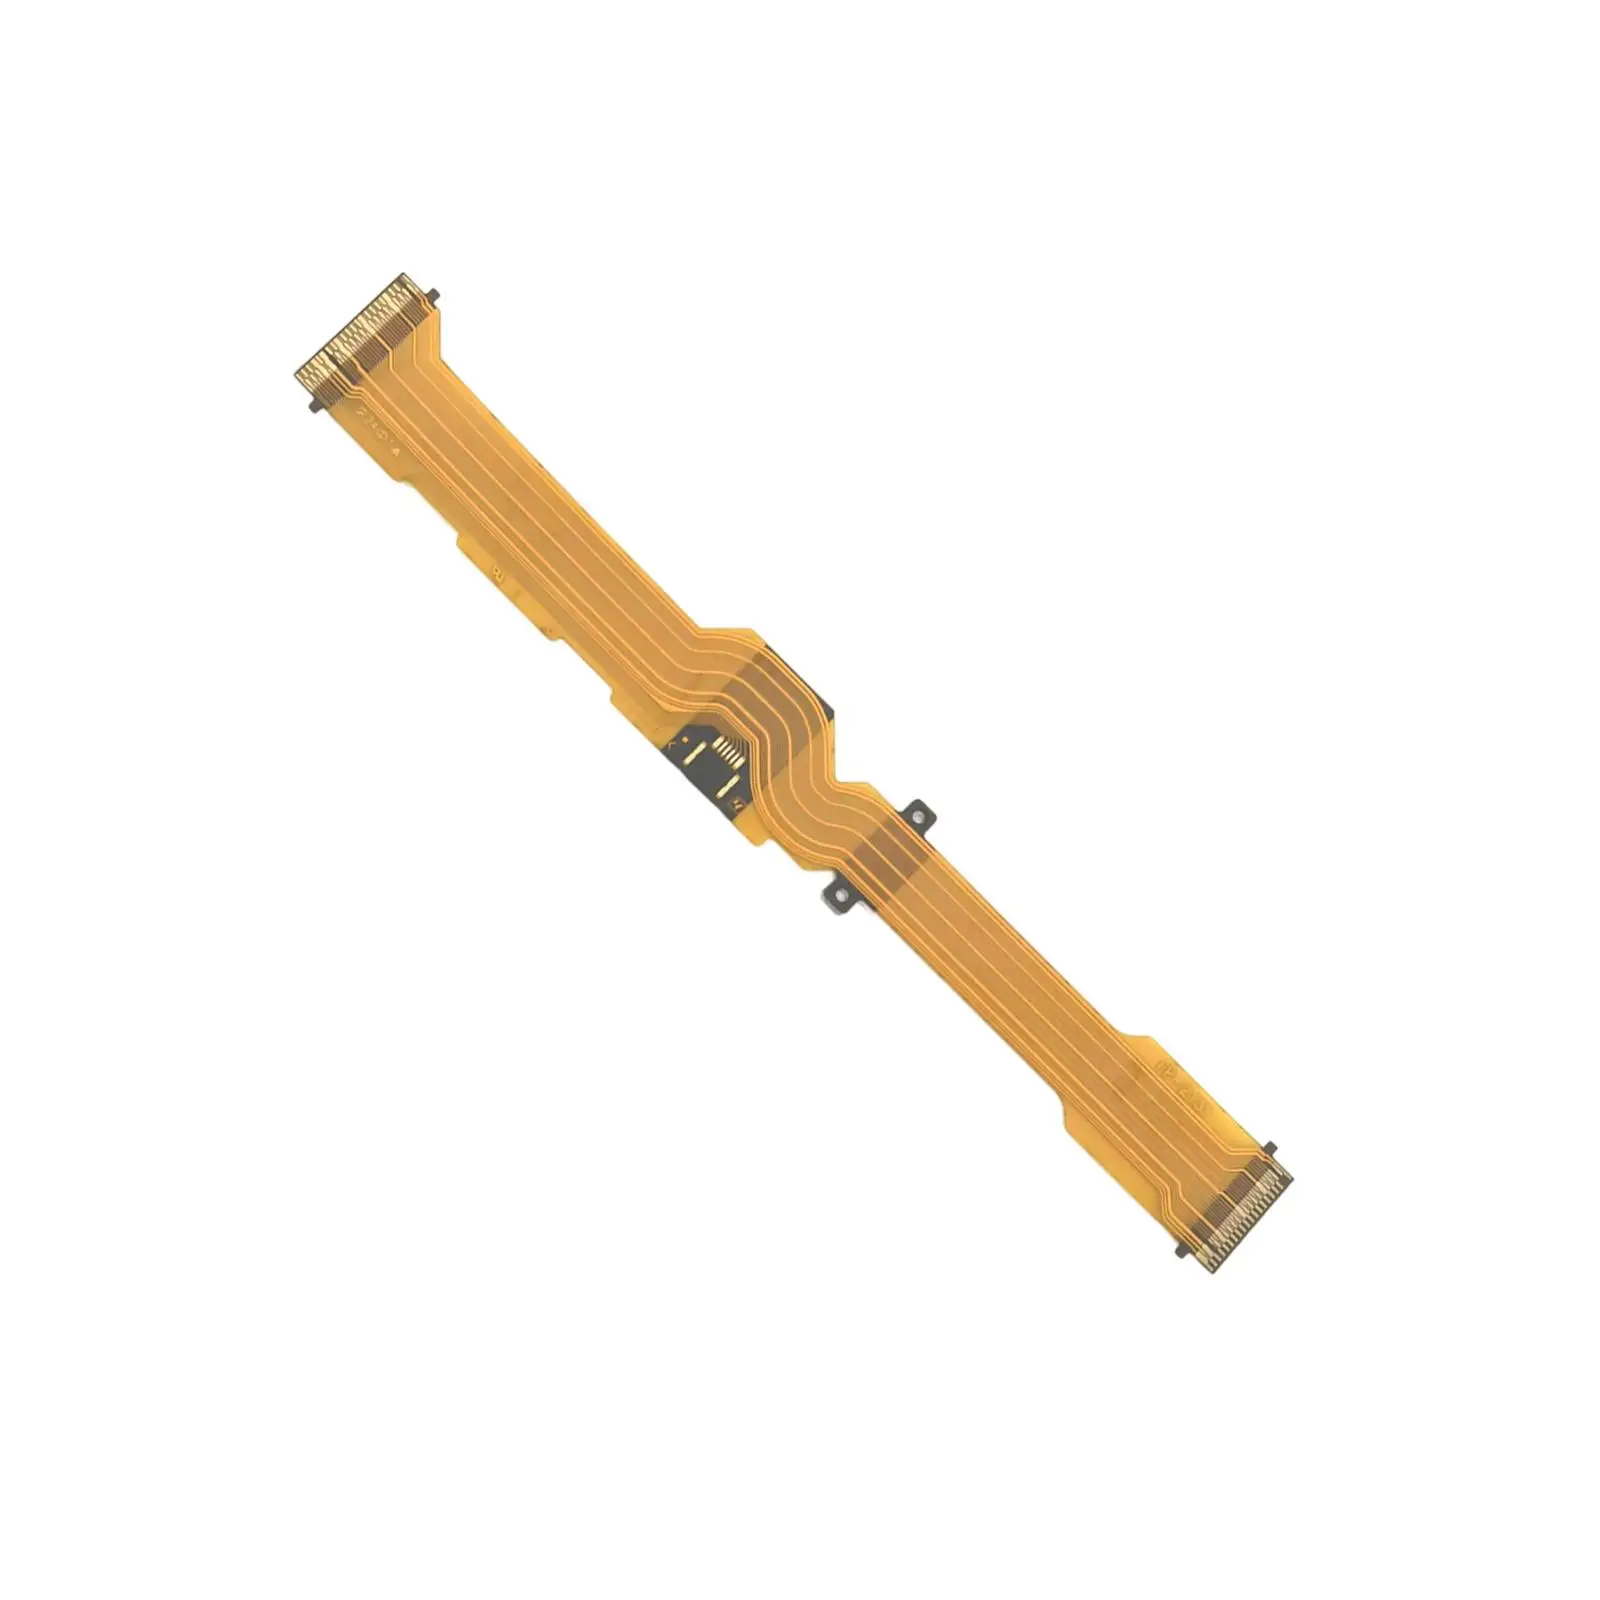 Camera LCD Display Flex Cable Sturdy Easy Installation for Dsc HX300 HX400 Accessories Replacement Assembly Spare Parts